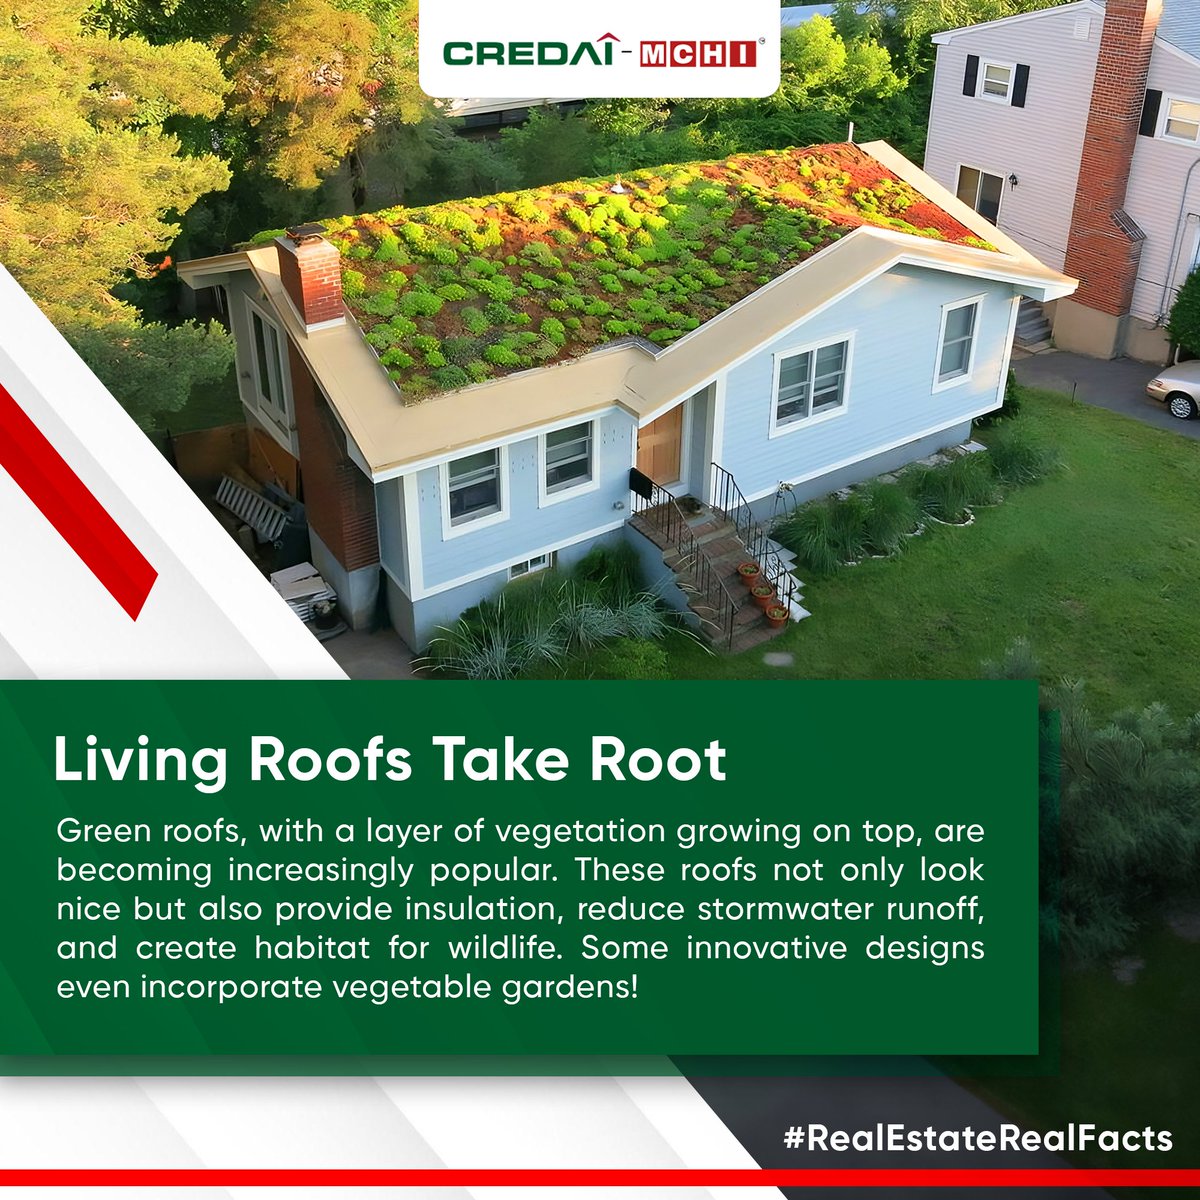 Green living, the ultimate form of happy life.
.
.
#CREDAI #CREDAIMCHI #RealEstate #RealEstateRealFacts #GreenLiving #EcoFriendlyLiving #SustainableLifestyle #LiveGreen #EnvironmentalAwareness #EcoHappiness #GreenFuture #SustainableLiving #Mumbai